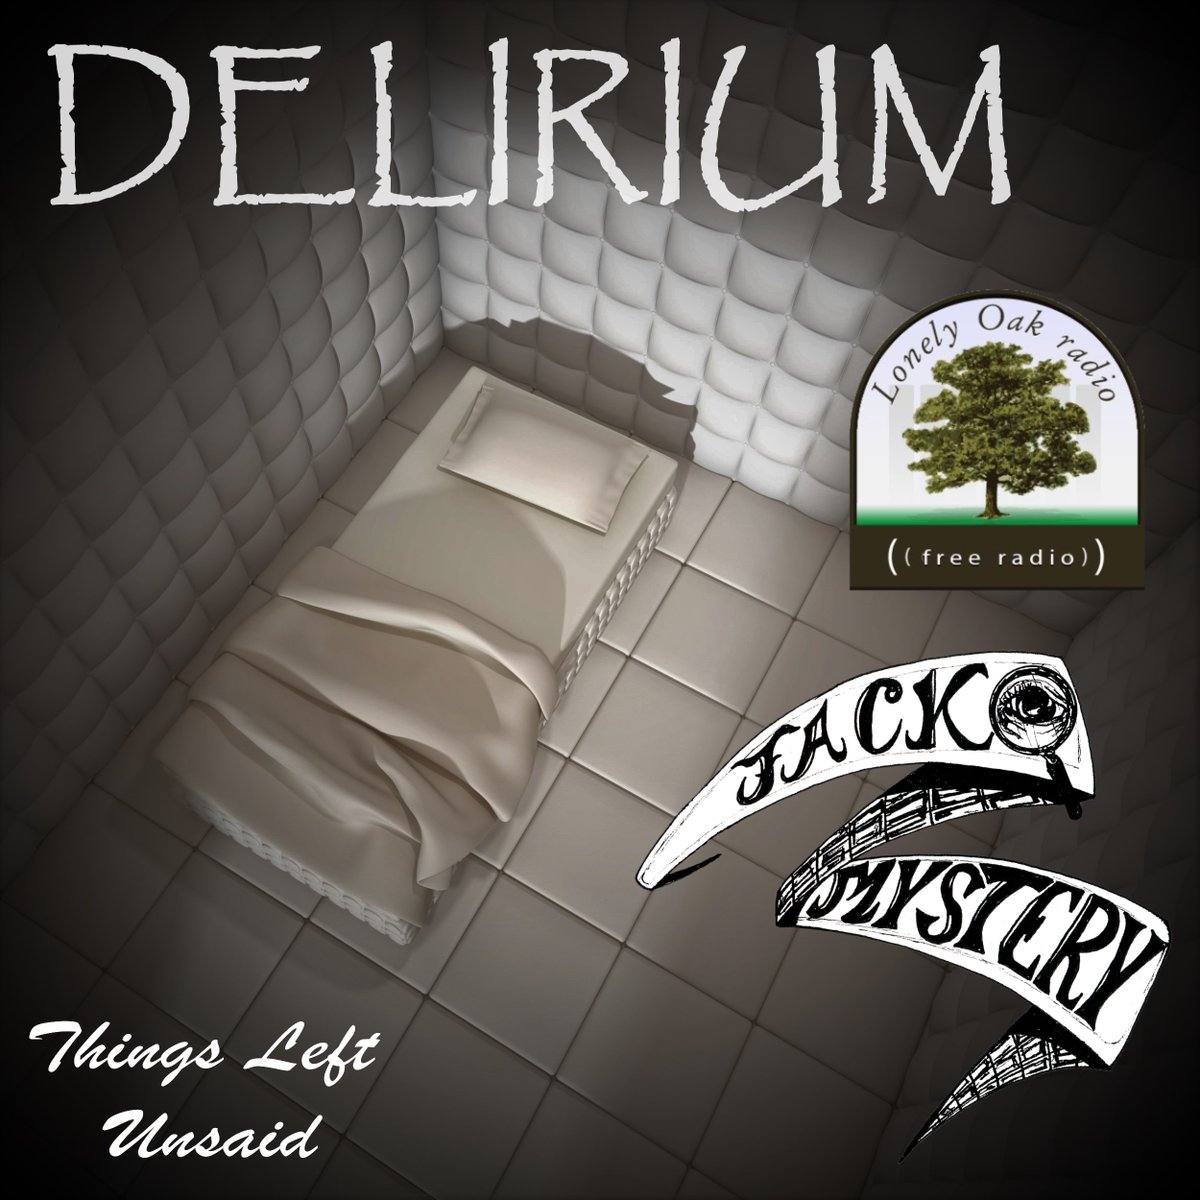 On Thursday, December 21  at 2:35 AM, and at 2:35 PM (Pacific Time) we play 'Delirium ' by Jack Mystery @JackMystery817 Come and listen at Lonelyoakradio.com / %23OpenVault Collection show, @LonelyOakradio